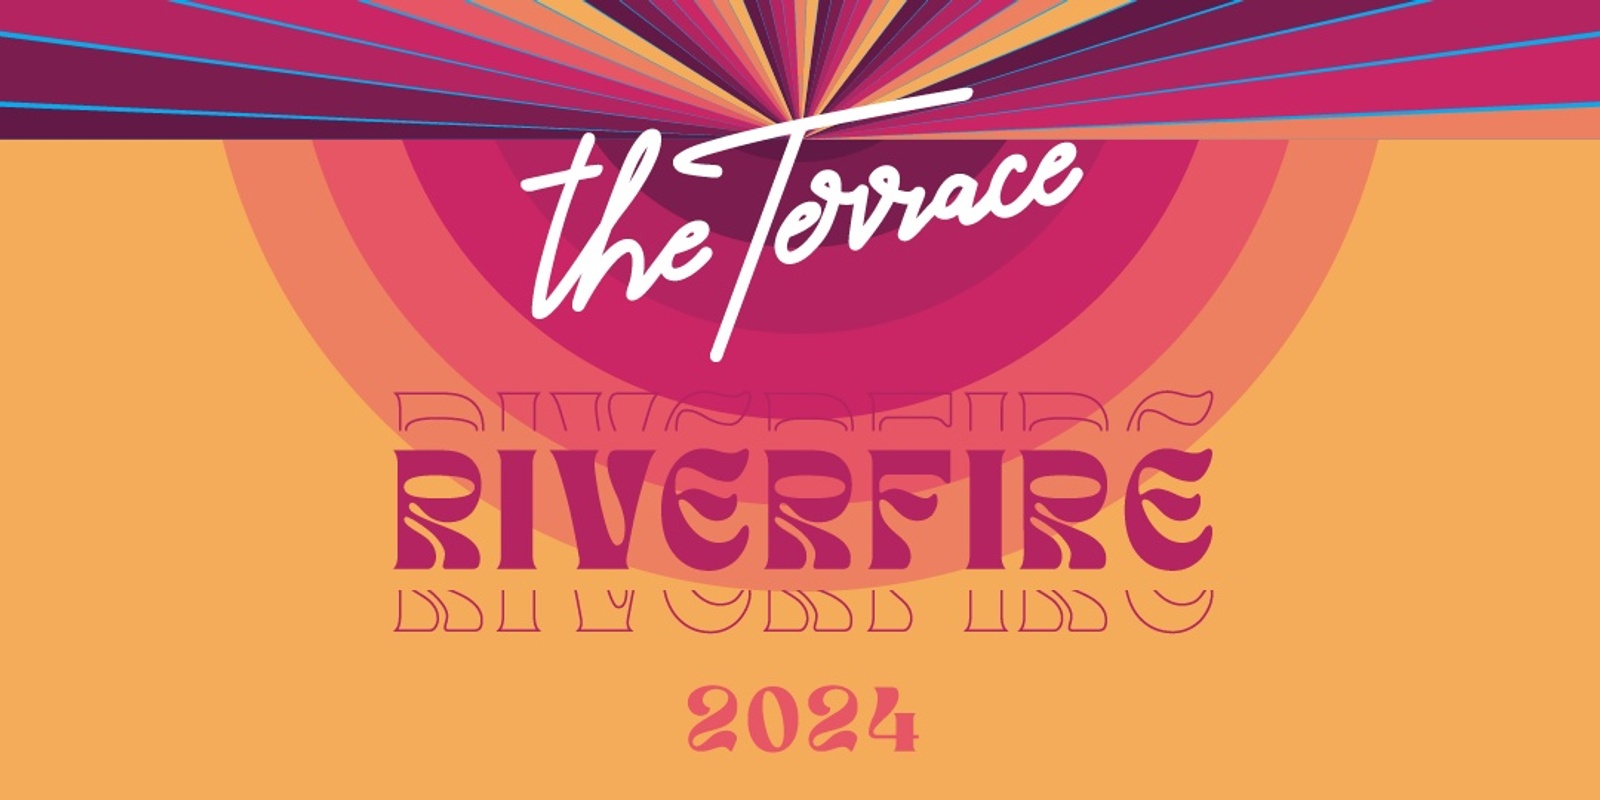 Banner image for Riverfire at the Terrace 2024